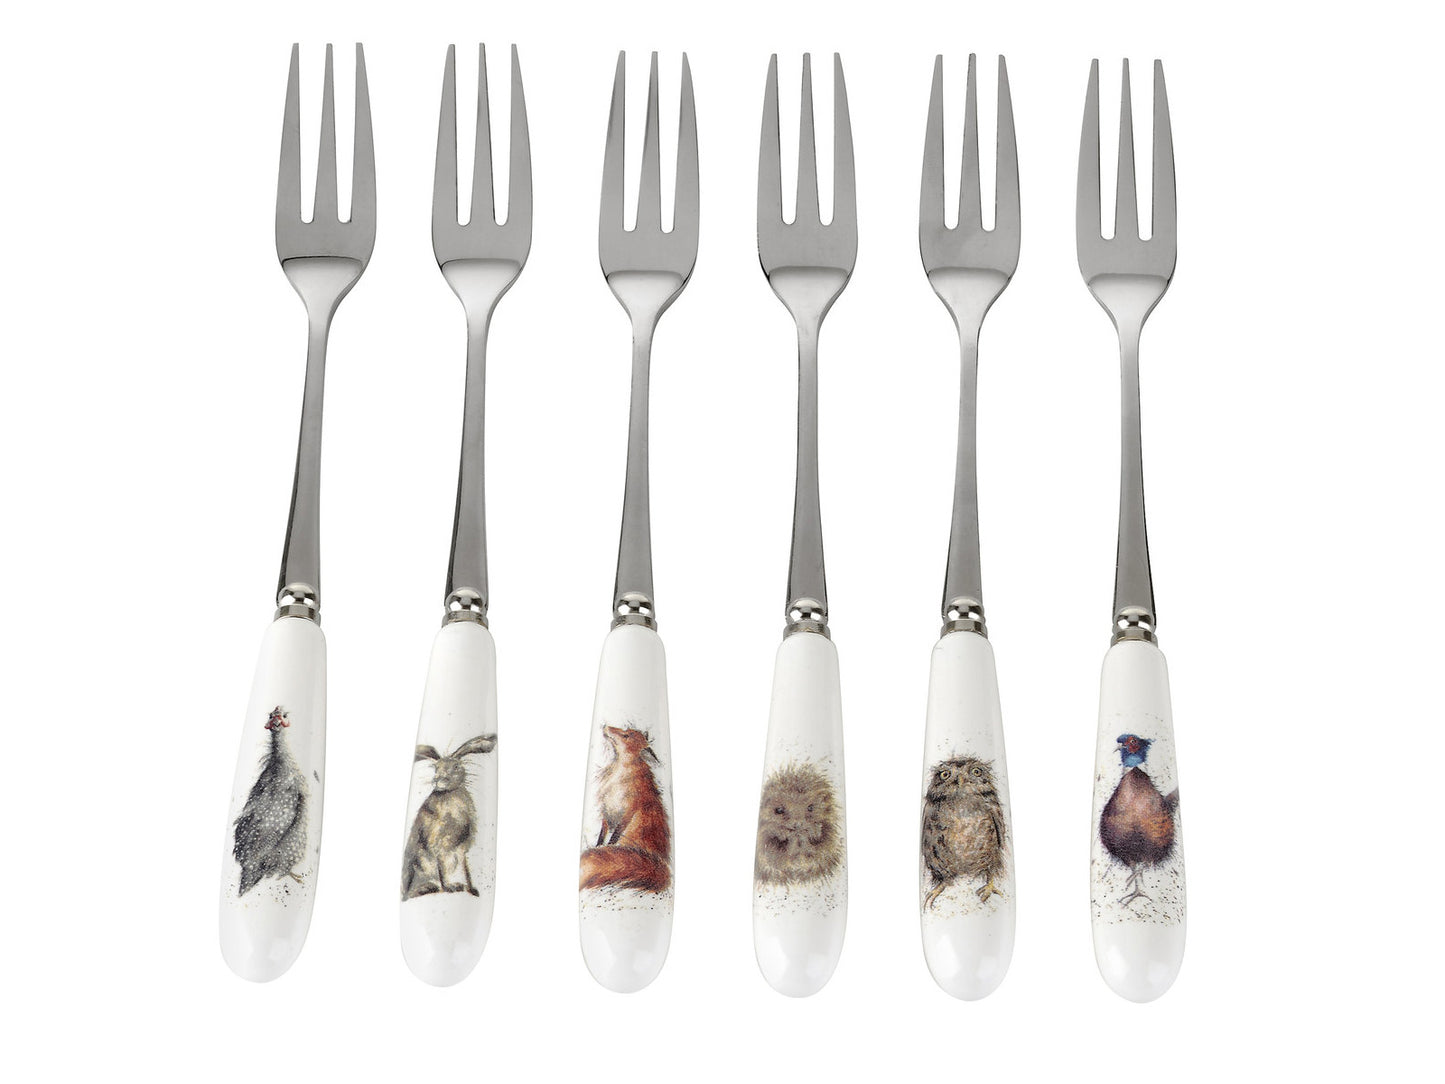 A set of six pastry forks with white porcelain handles and stainless steel prongs. Each handle has a different watercolour animal illustration on it